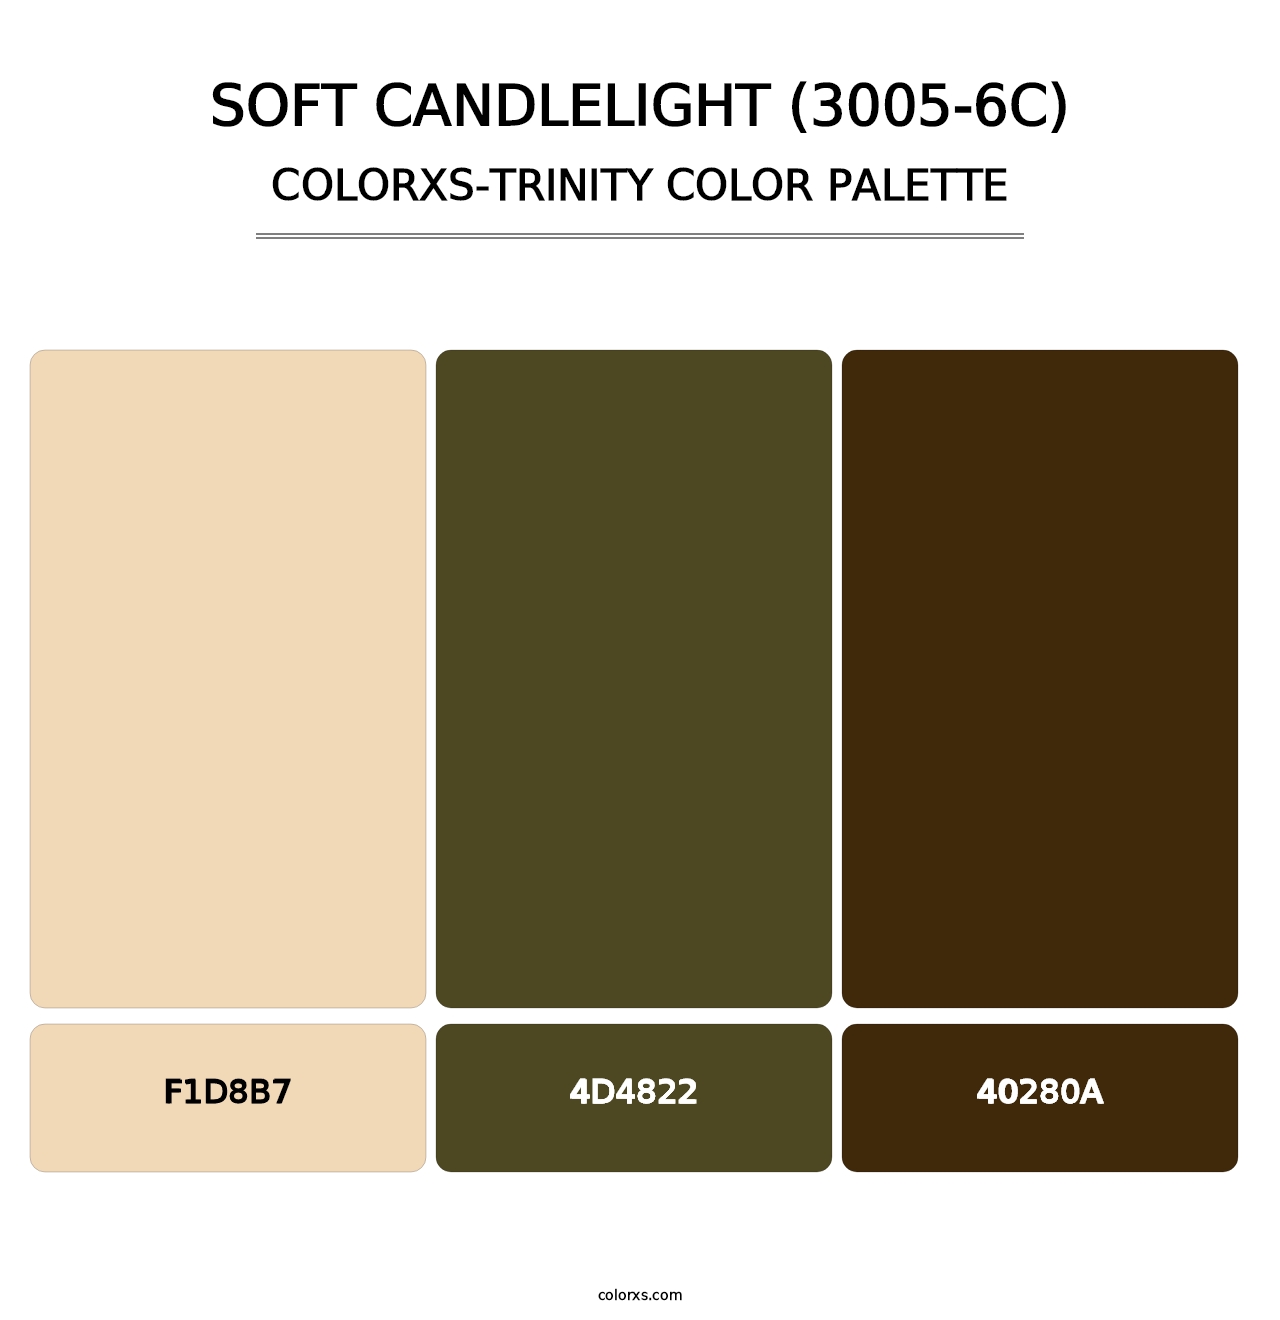 Soft Candlelight (3005-6C) - Colorxs Trinity Palette